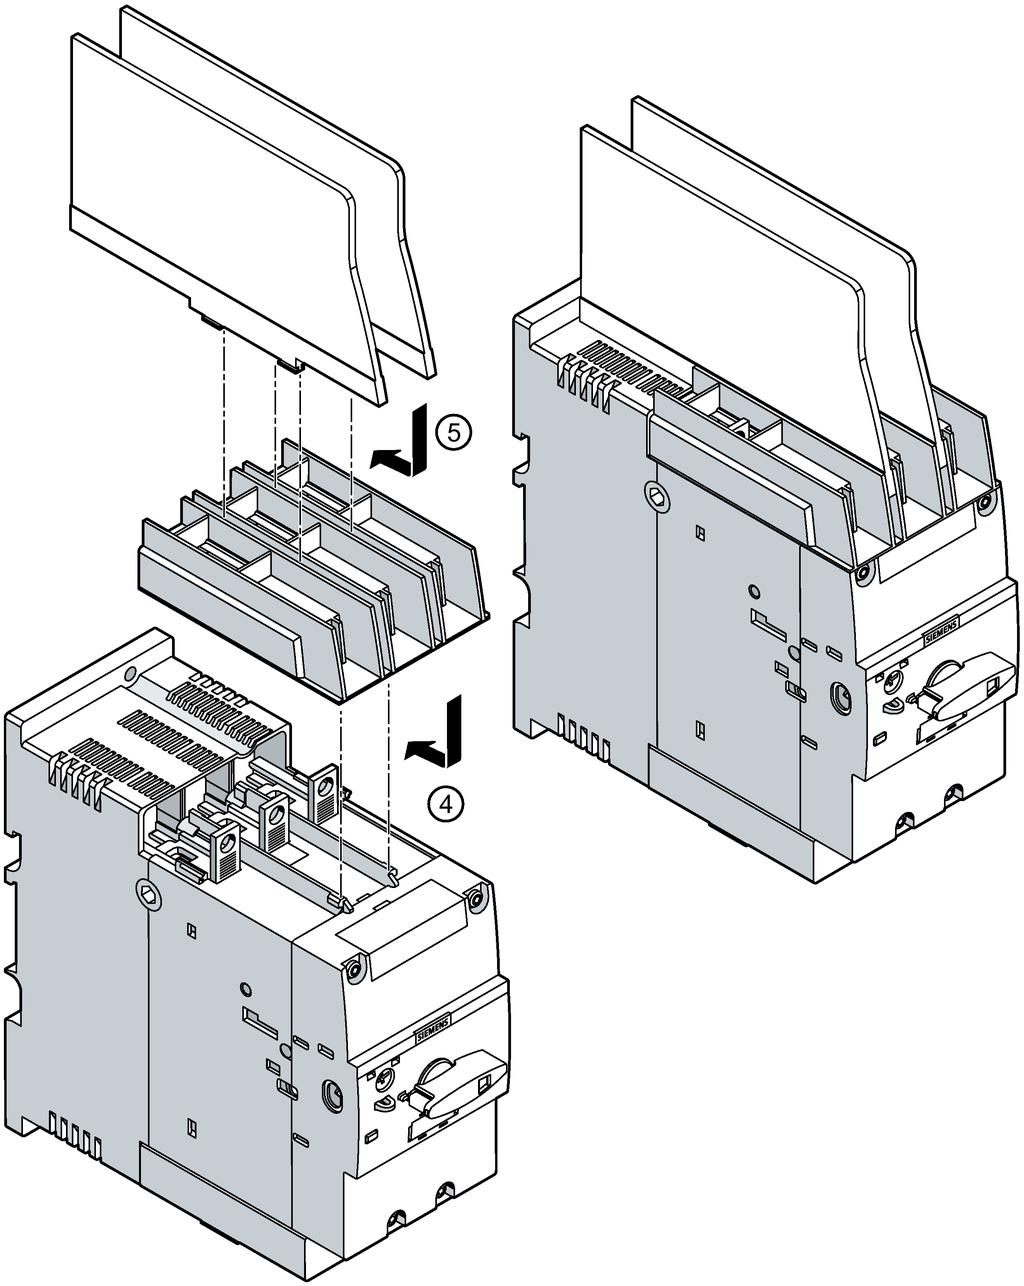 Accessories 10.7 Phase barriers / terminal block UL 60947-4-1 (UL 508) "Type E" 4 5 Slide the terminal block into the guide tabs provided on the motor starter protector.